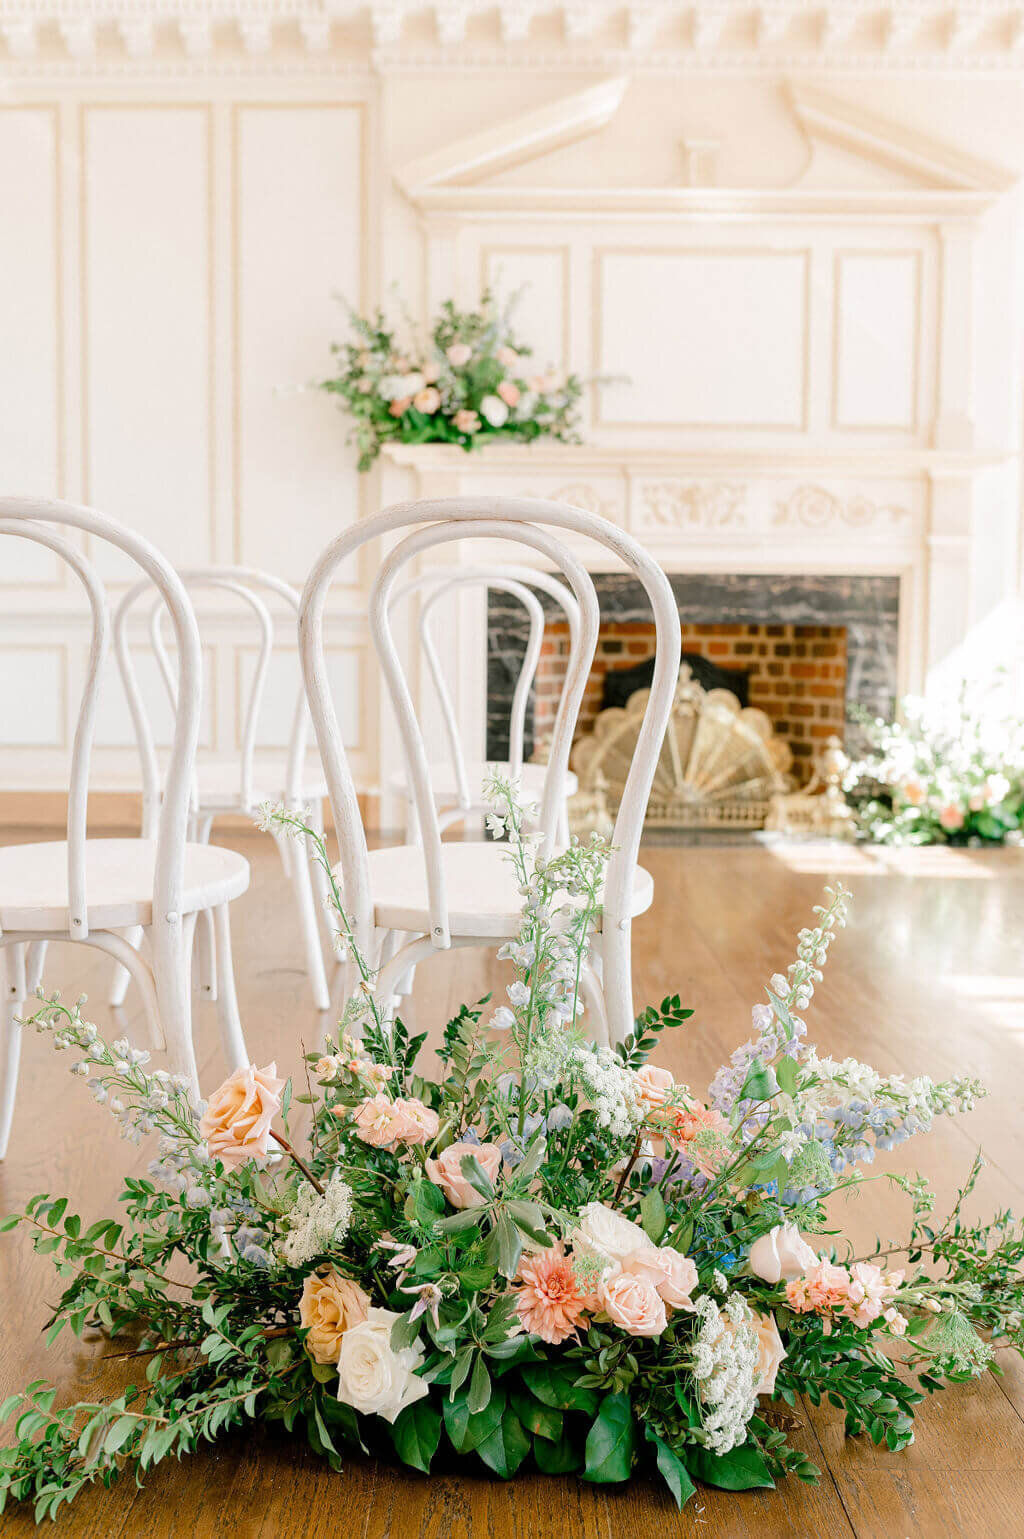 floral meadow behind wedding chair at ceremony site